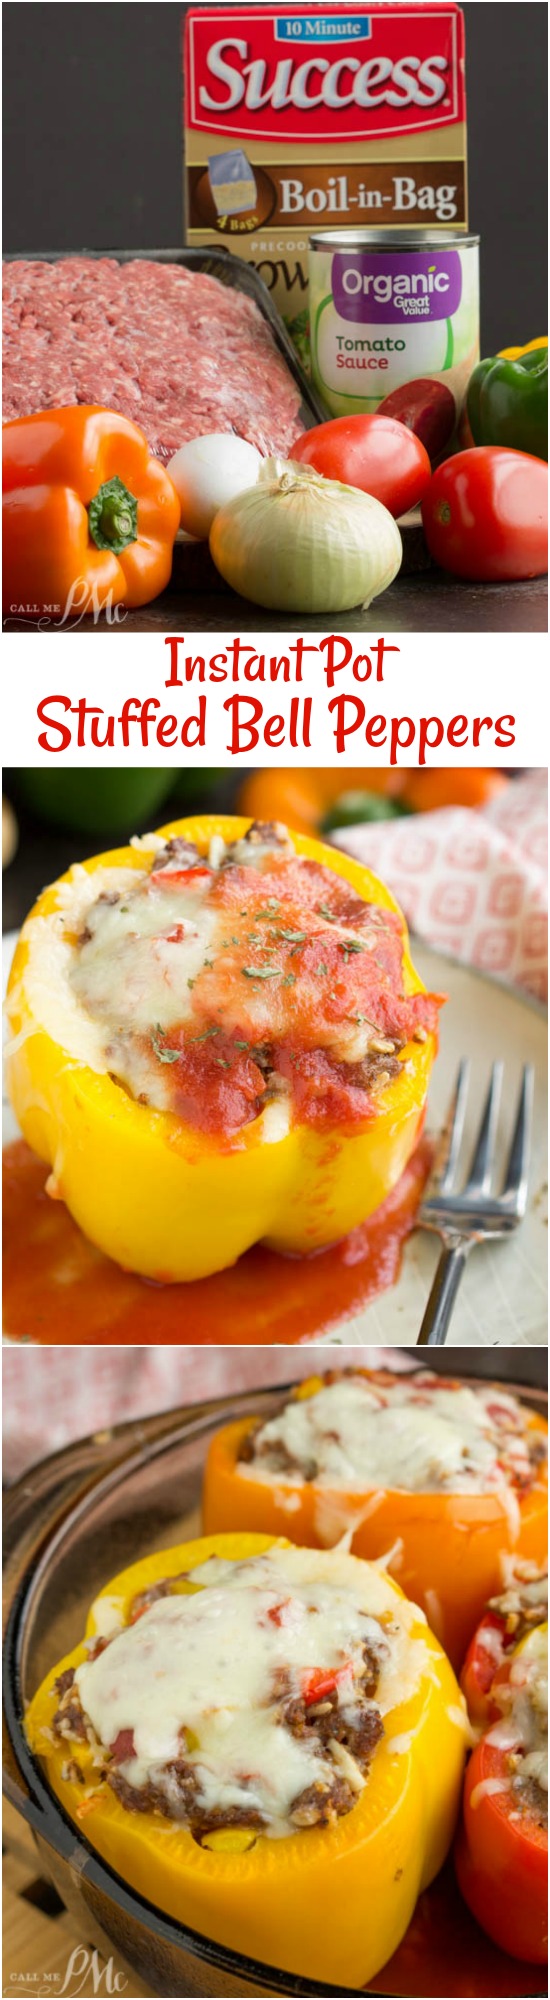  Stuffed Bell Peppers 